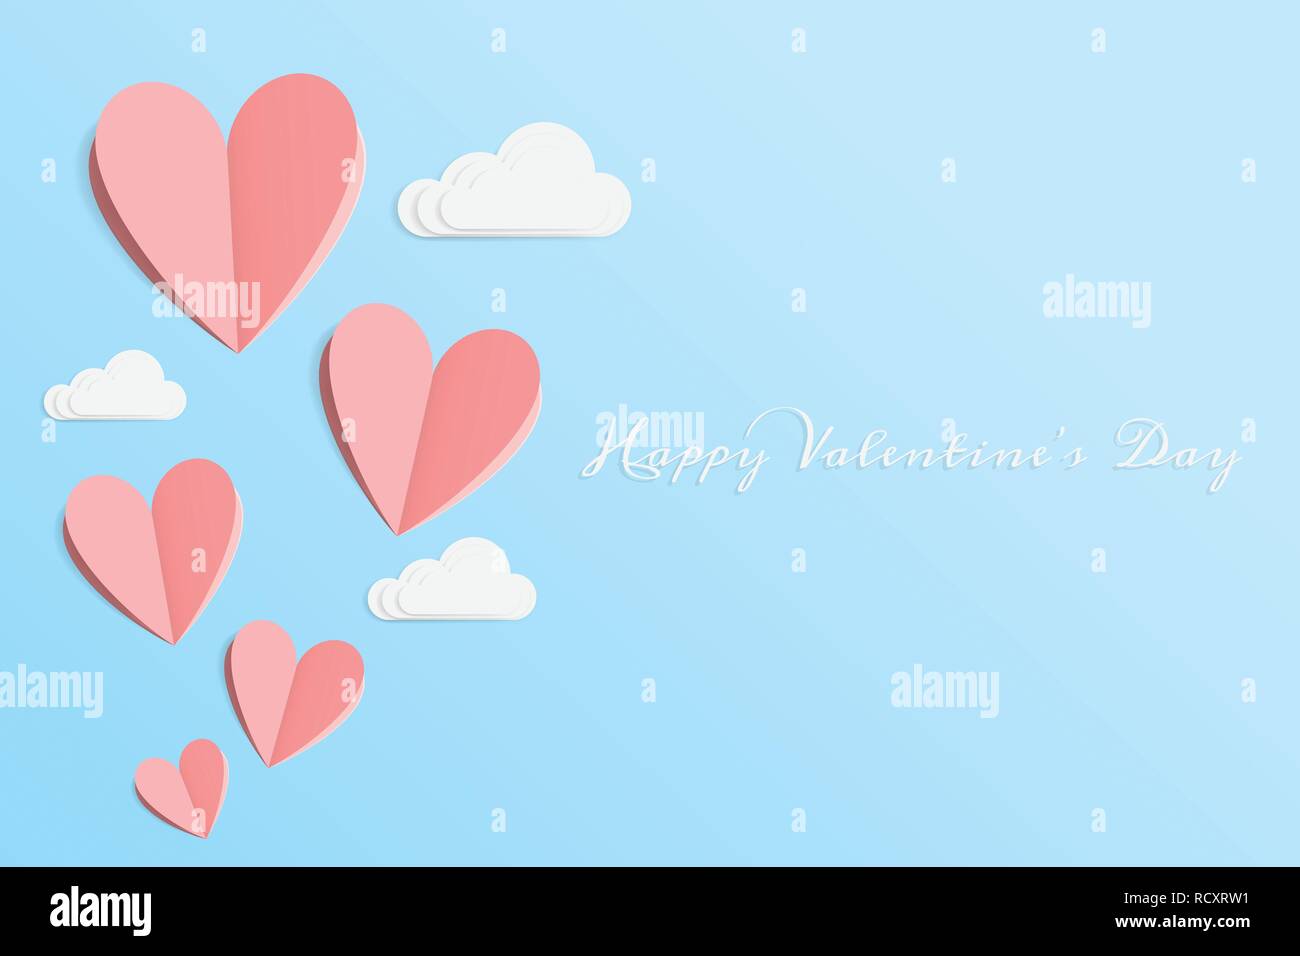 vector of love and Happy Valentine's day. origami design elements cut paper made pink heart float up on the blue sky with white cloud. paper art and d Stock Vector